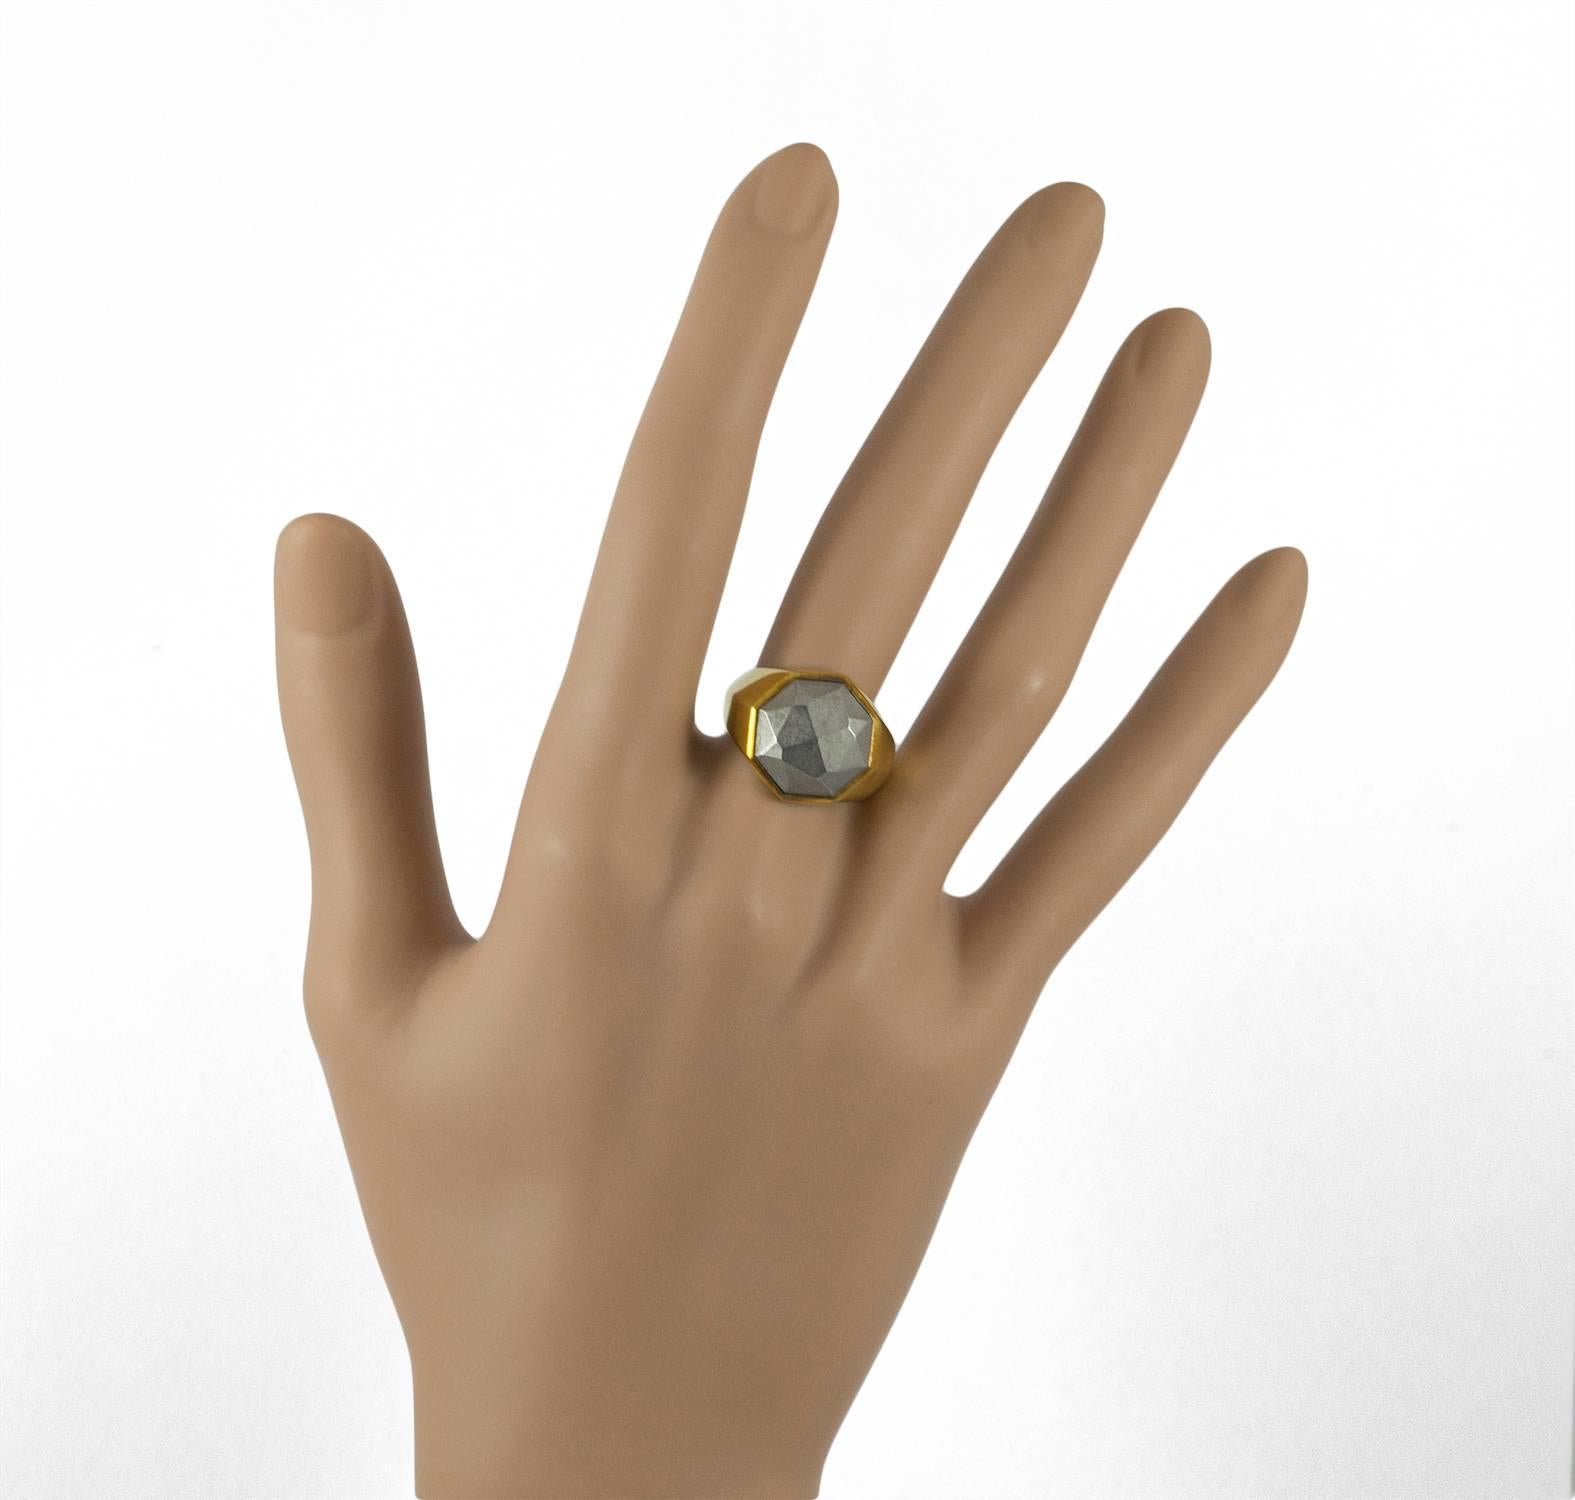 This unusual David Yurman ring is set in 18KT yellow gold. It bares the David Yurman signature and an additional mark indicating the collection. The ring is unique and set with a faceted piece of meteorite. it measures size 6.5 and would be a